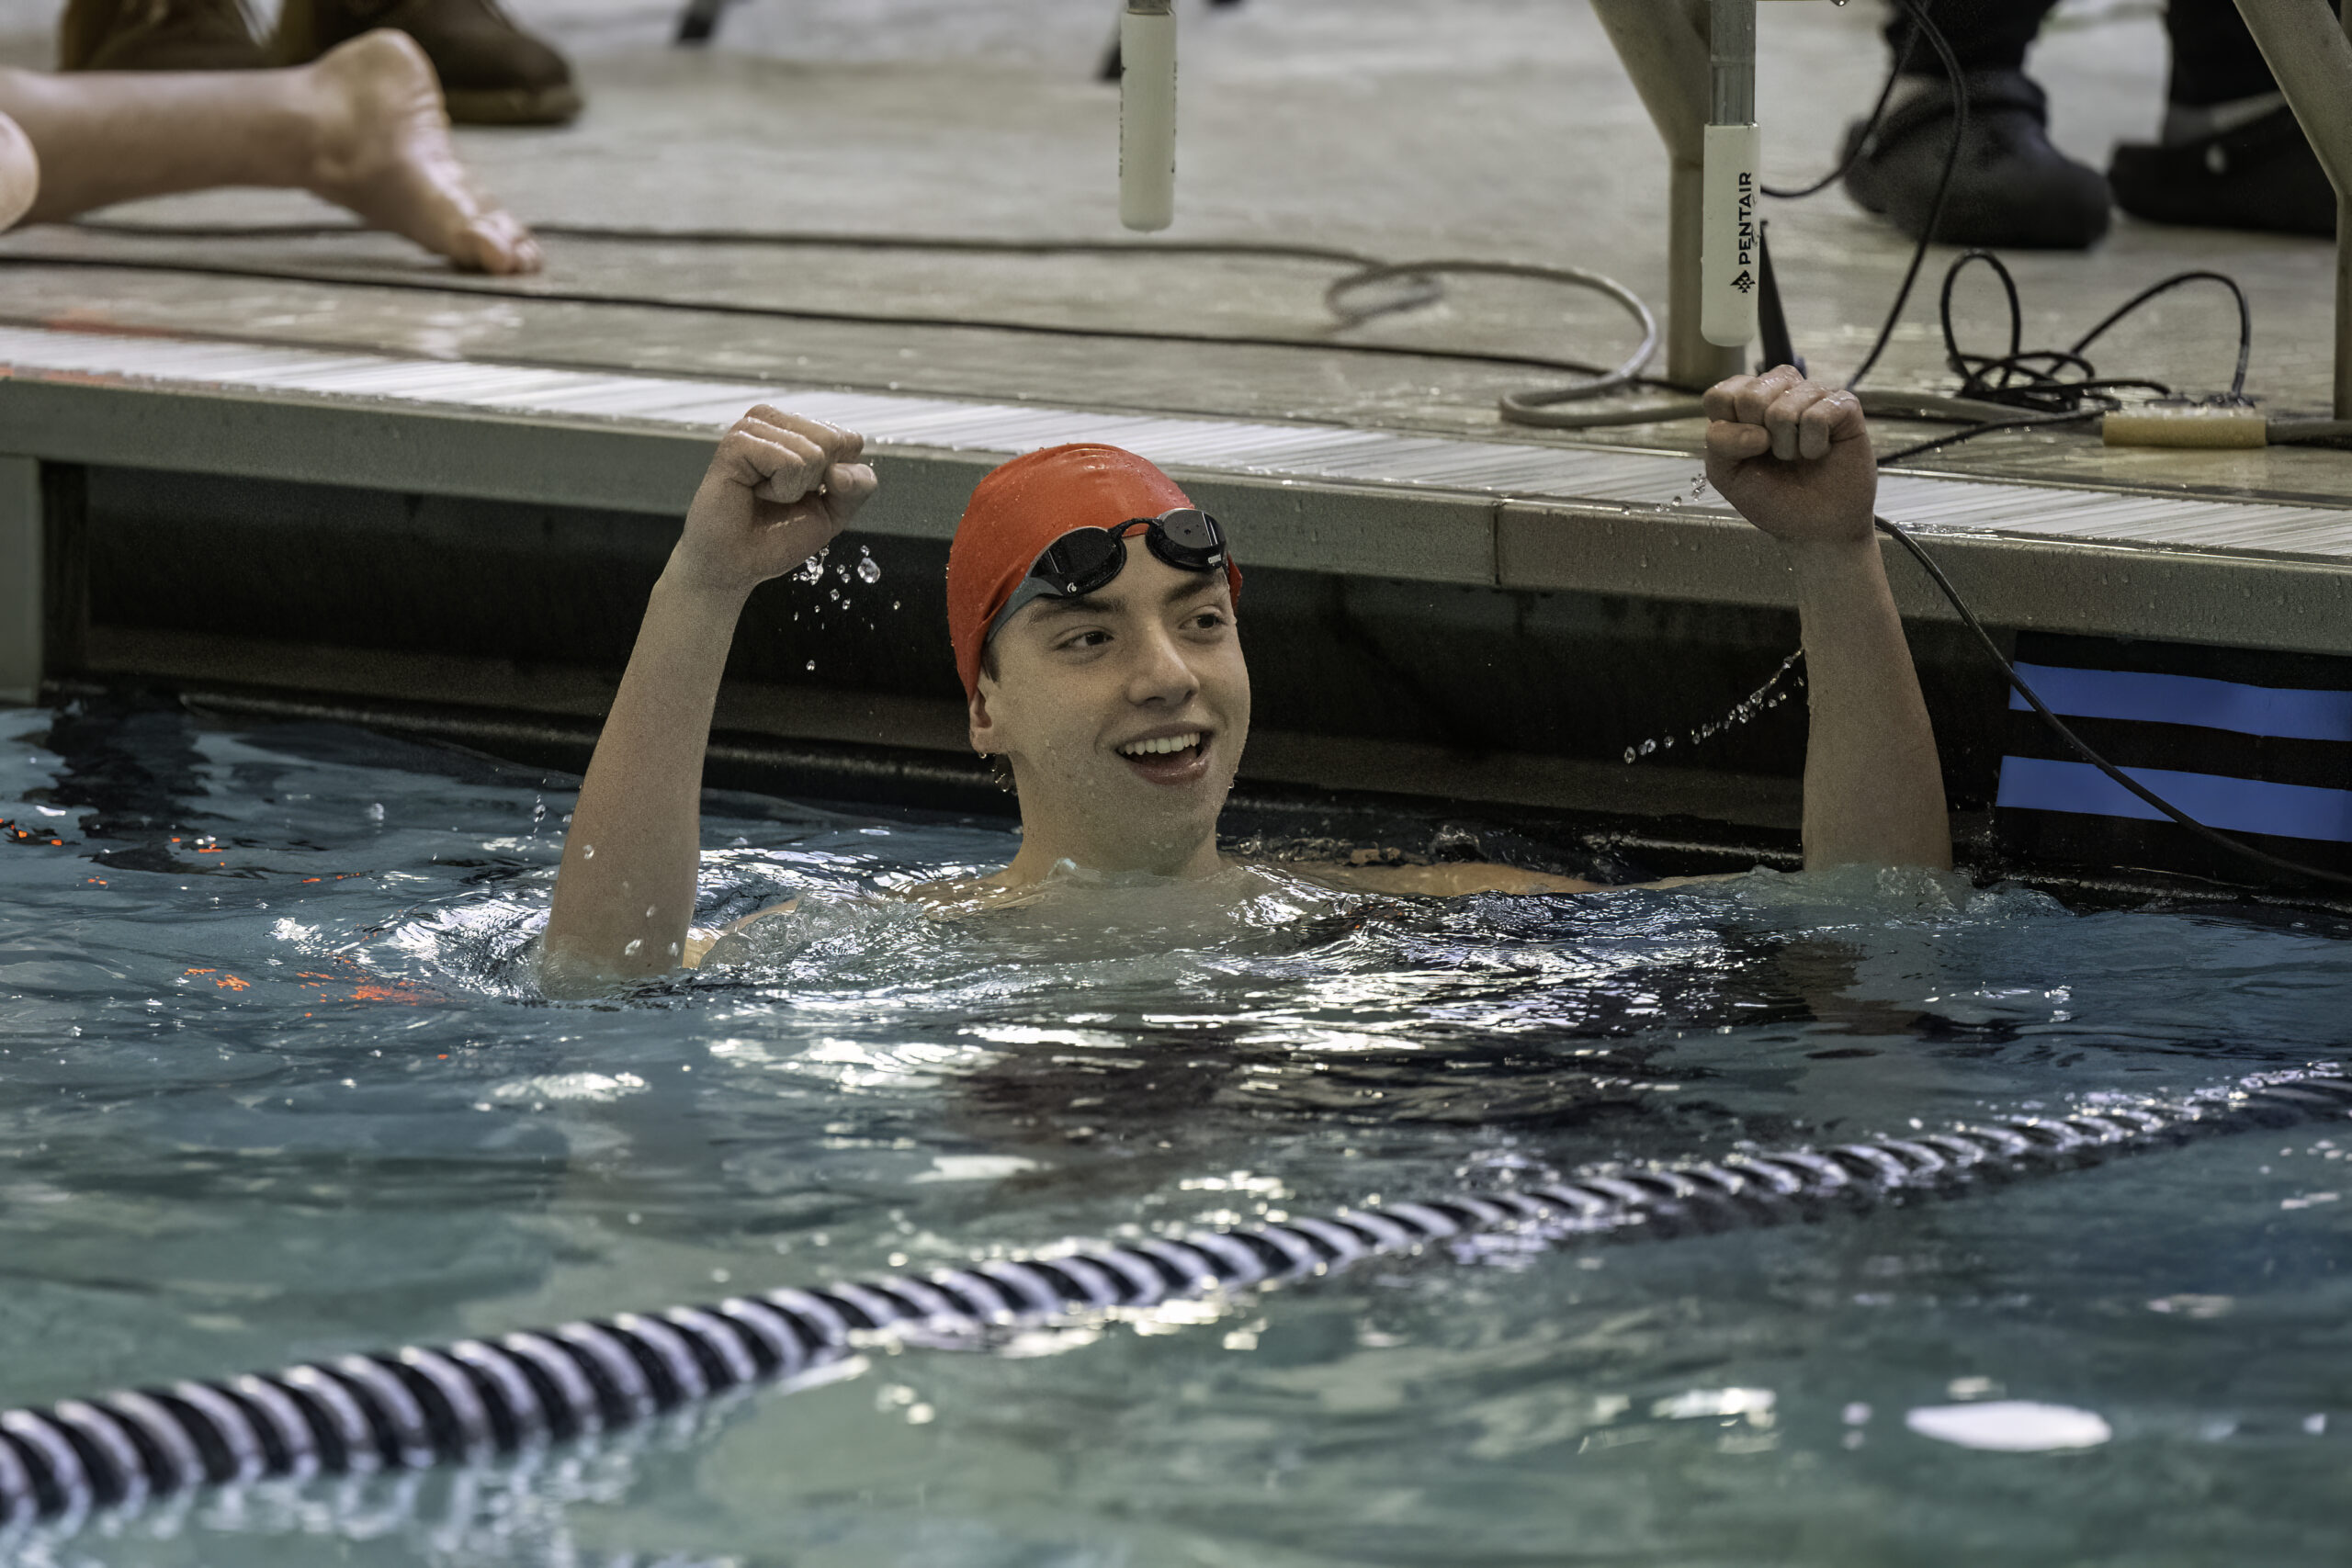 Westhampton Beach junior Max Buchen looks at the clock and celebrates his time in the 100-yard breaststroke. MARIANNE BARNETT